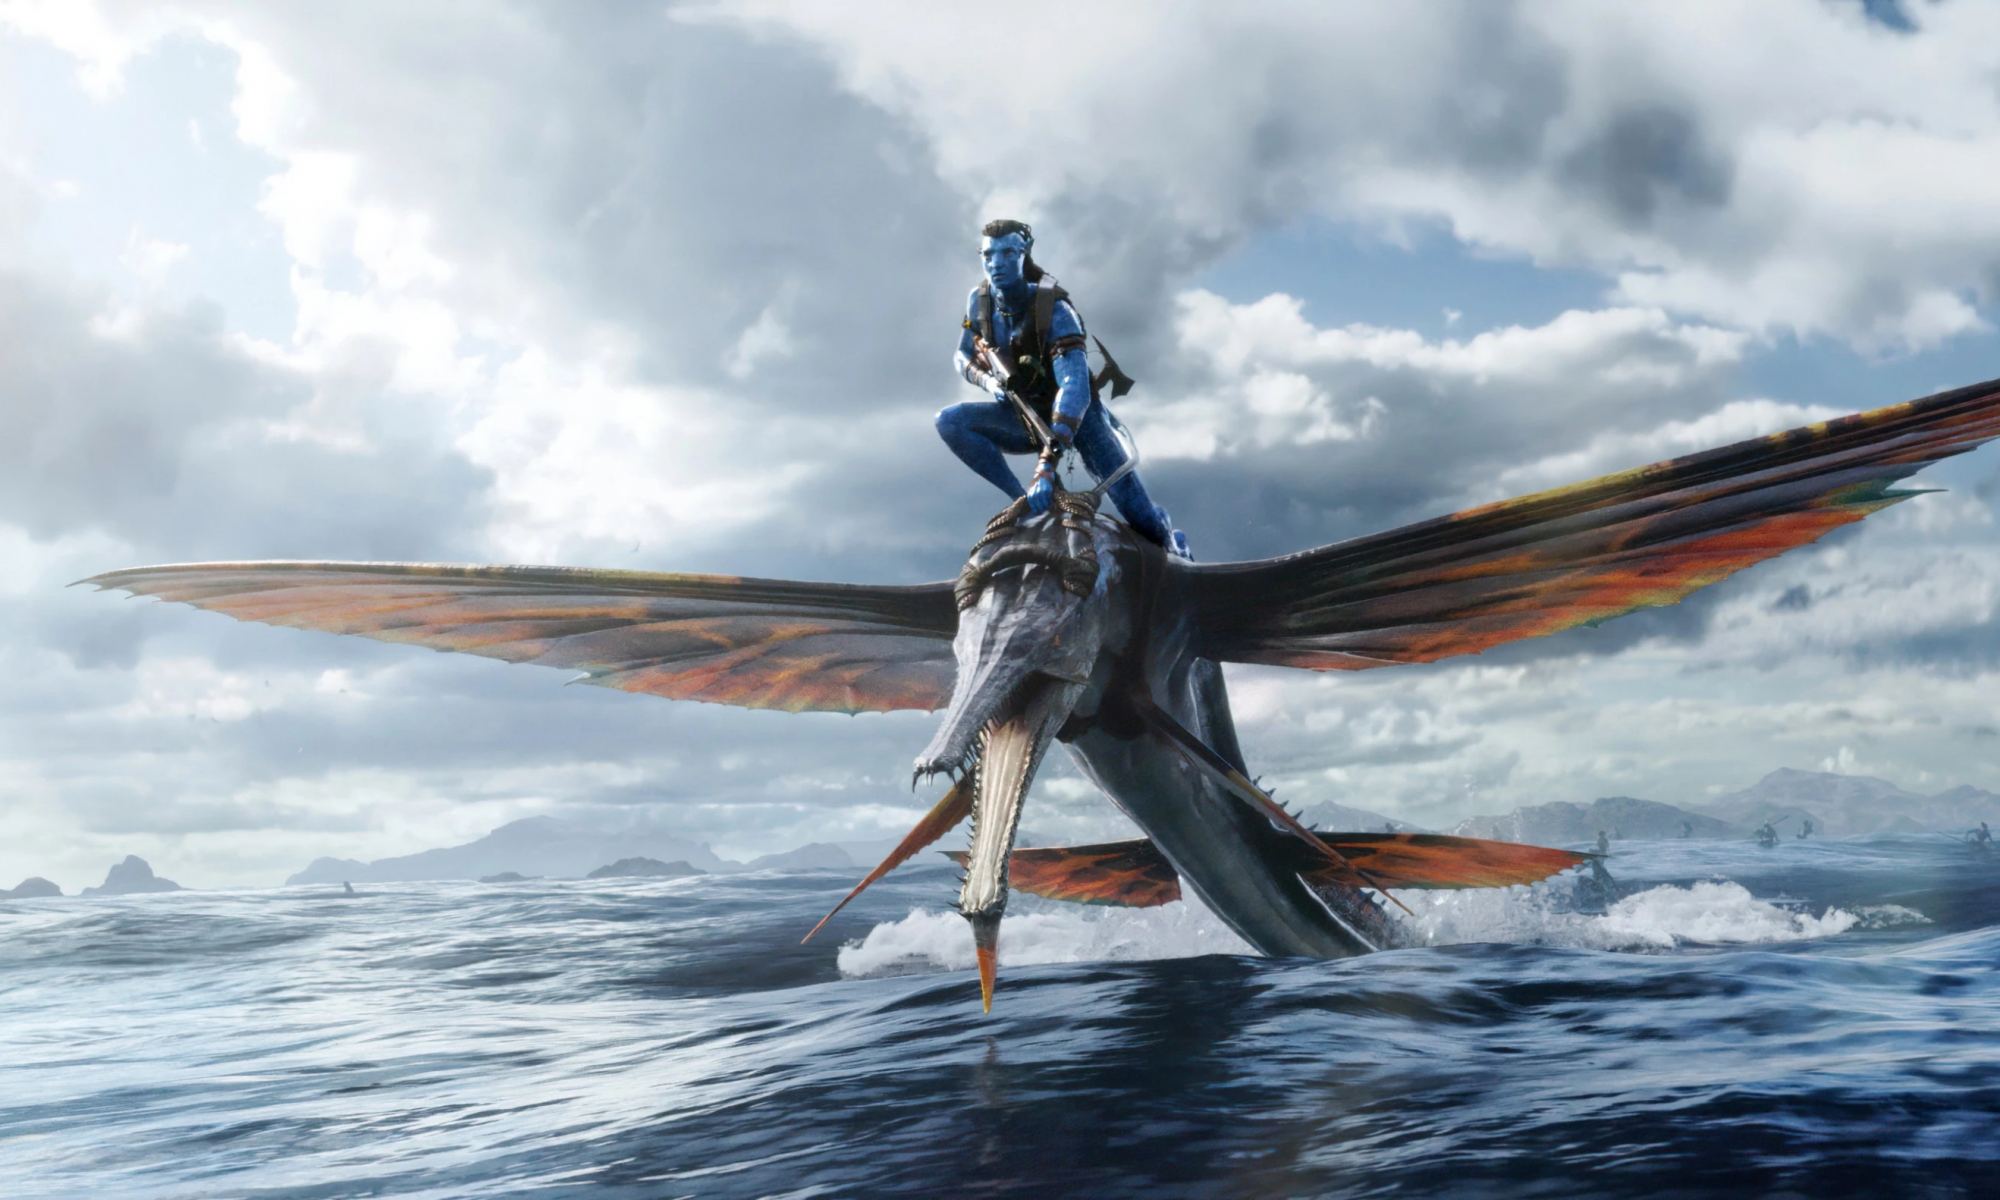 Jake Sully riding a flying fish in "Avatar: The Way of Water."